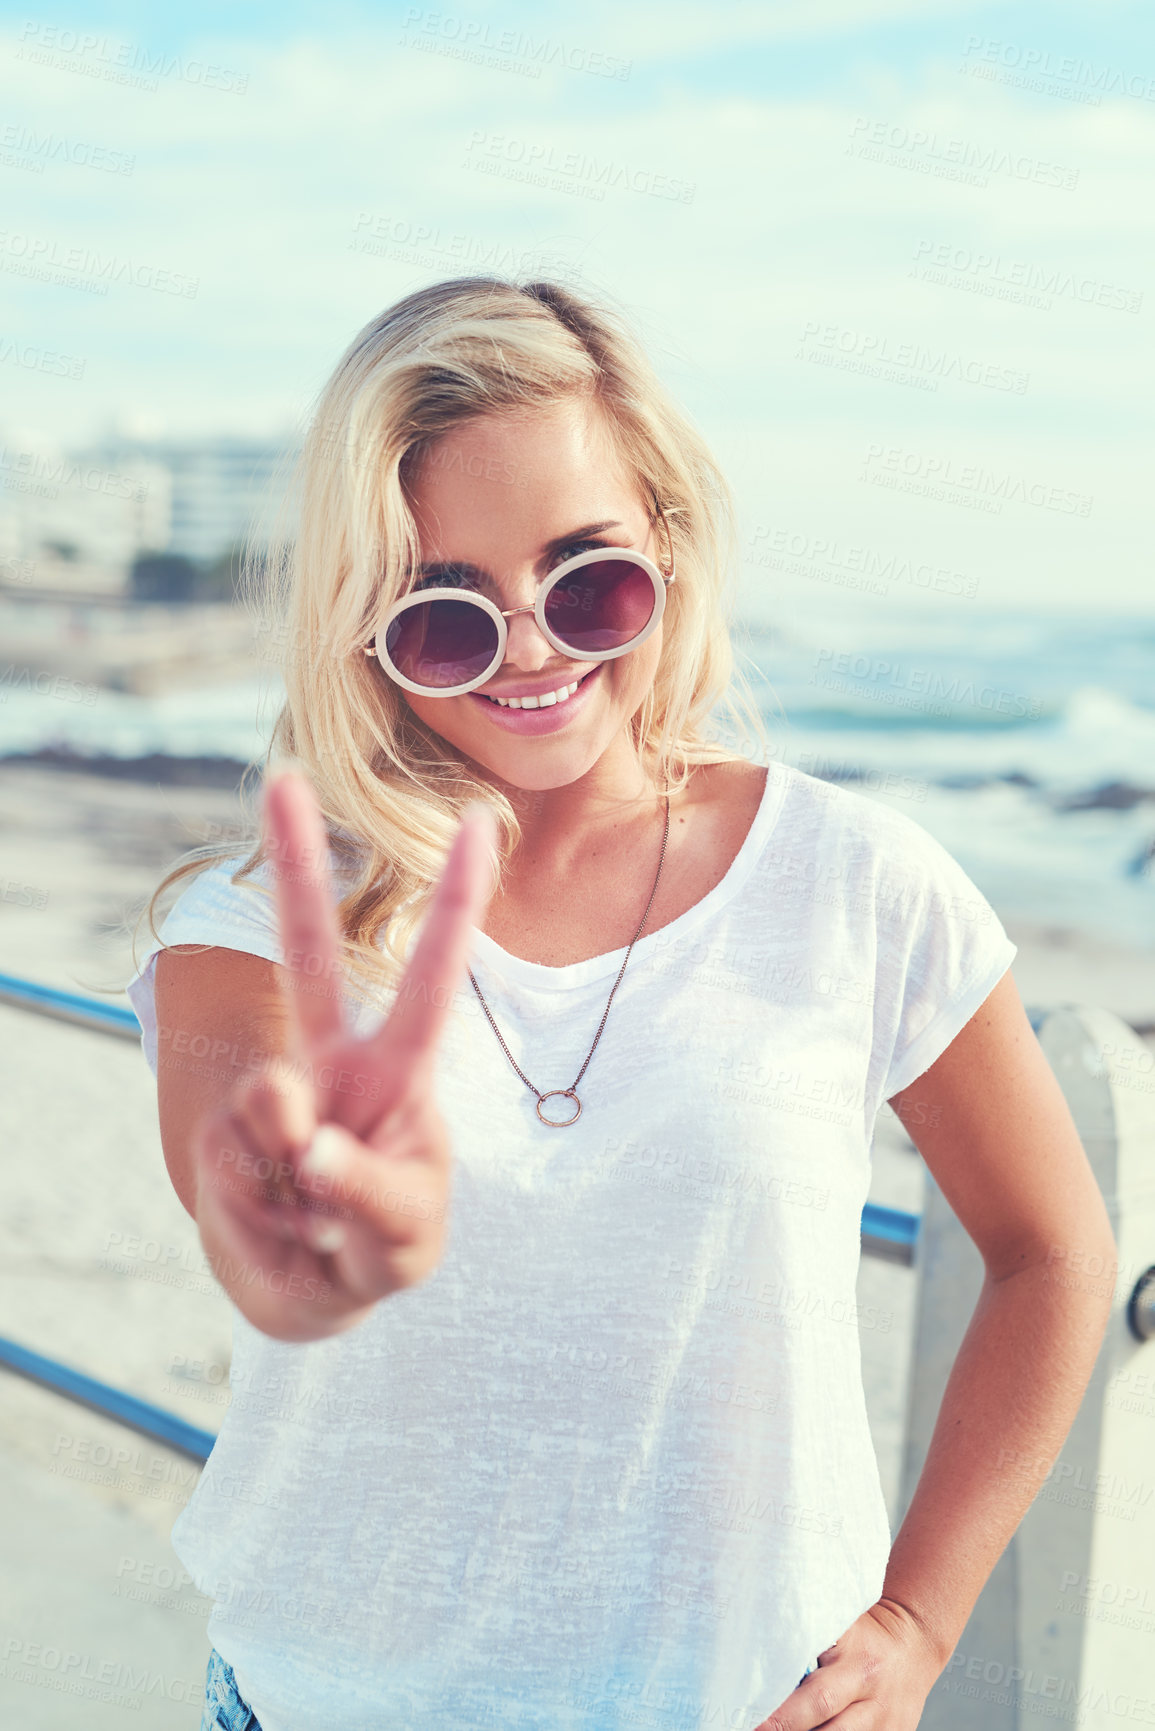 Buy stock photo Shot of a young woman showing the peace sign while standing outdoors on a sunny day